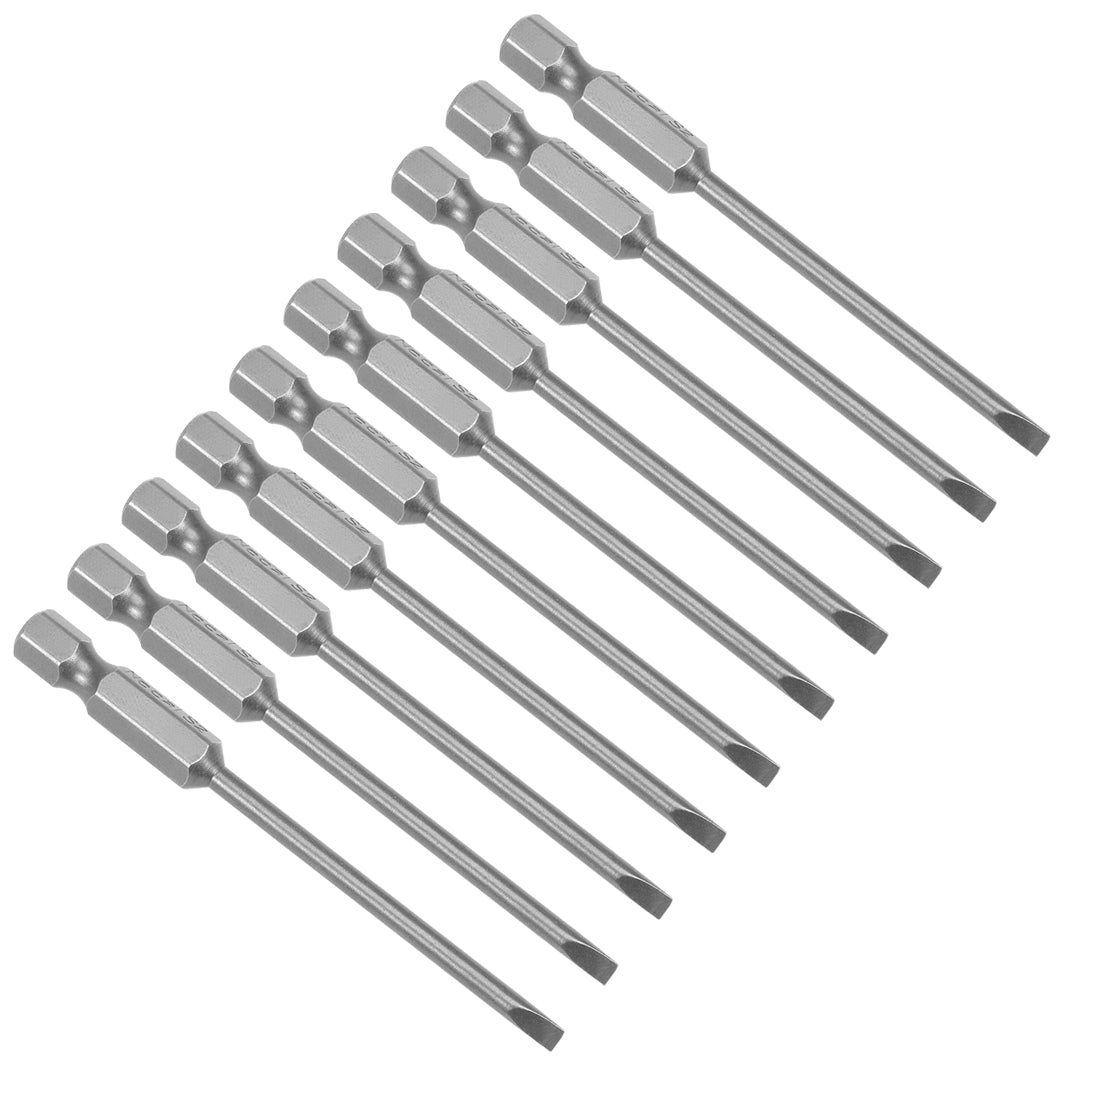 uxcell Uxcell 10Pcs 1/4" Hex Shank 75mm Length Magnetic SL3 Slot Head Screwdriver Bits S2 Alloy Steel